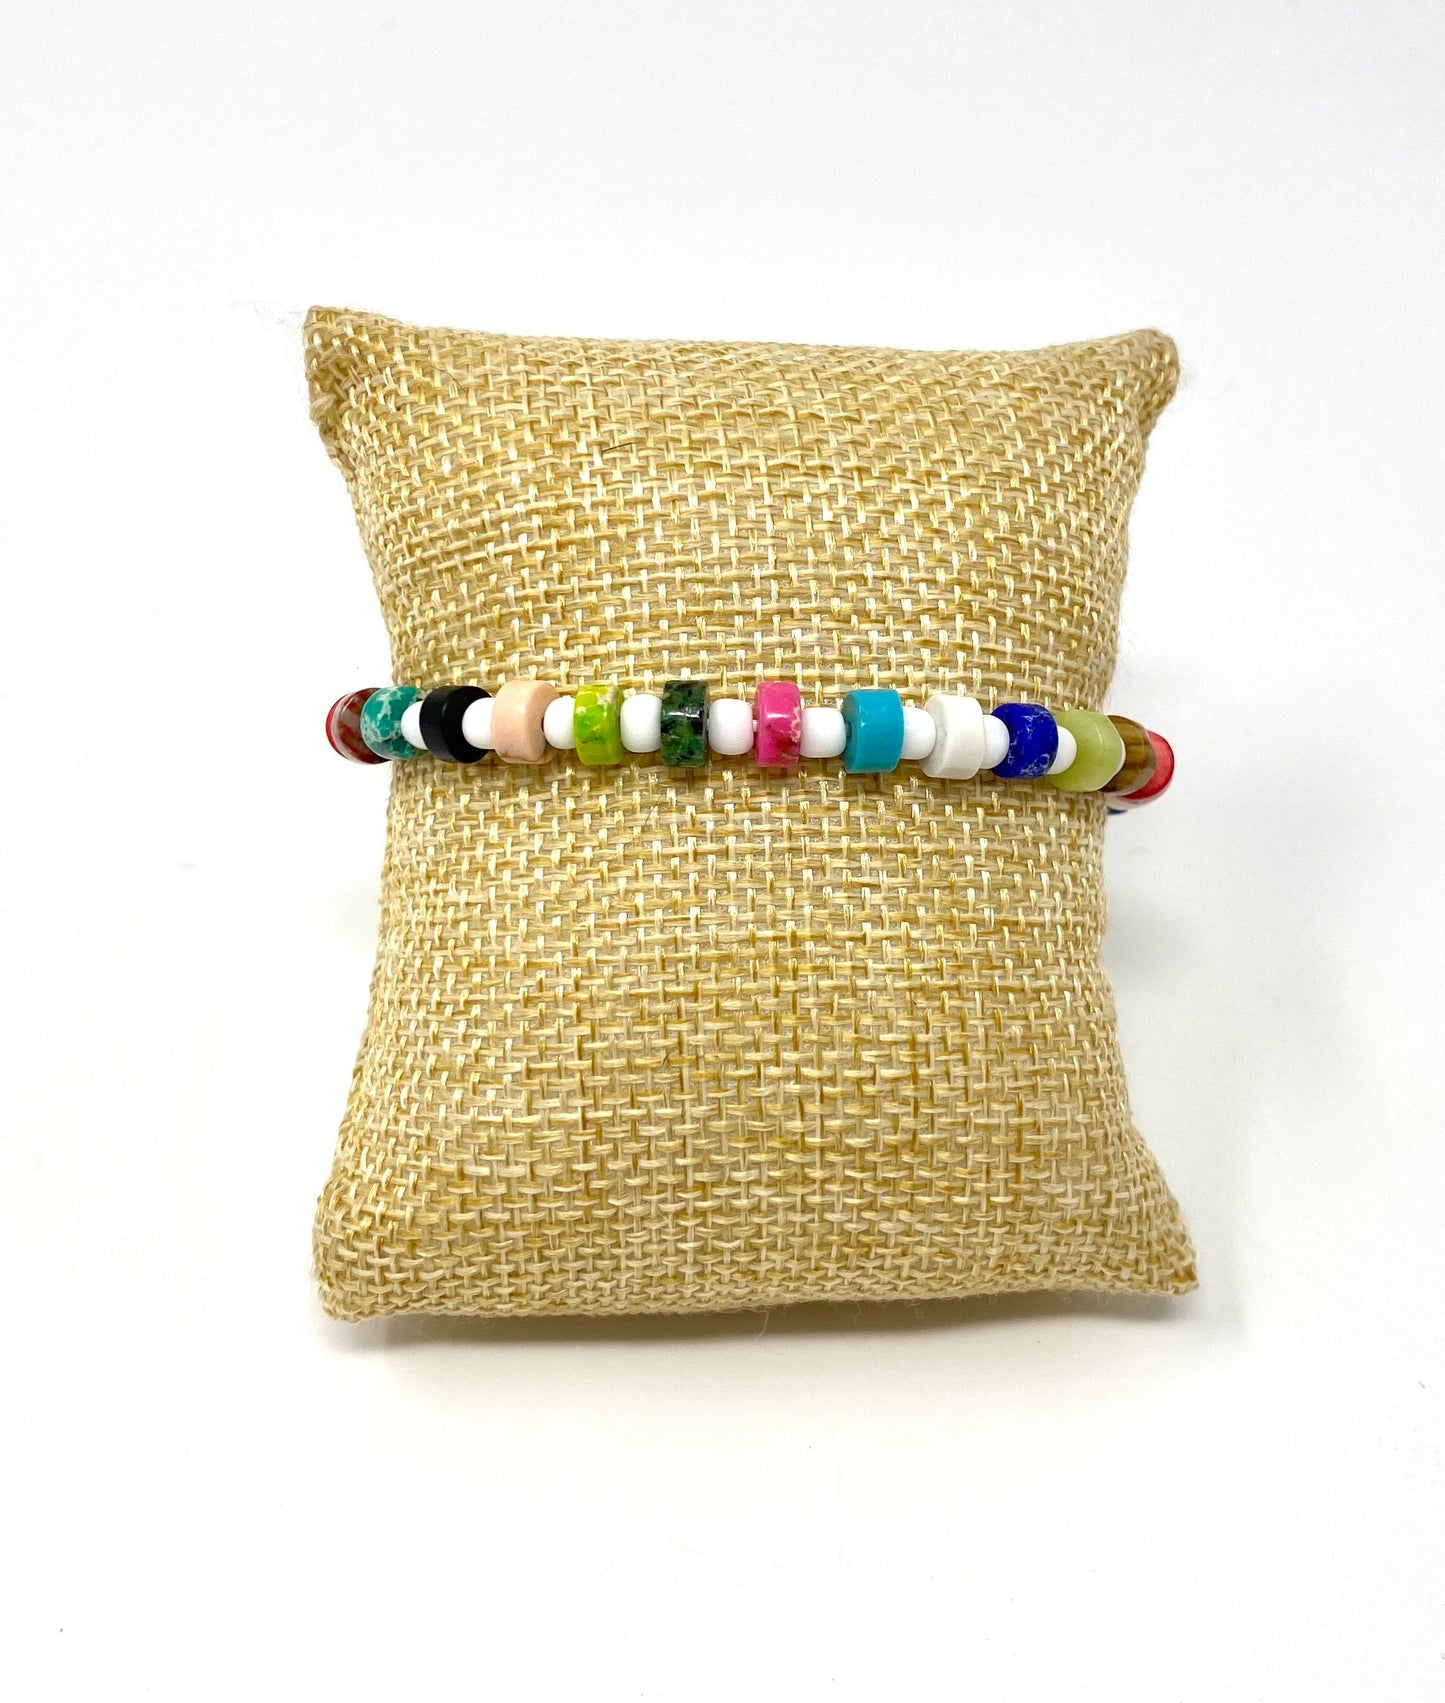 Multicolored Howlite Disk Bracelet with White Seed Bead Spacers